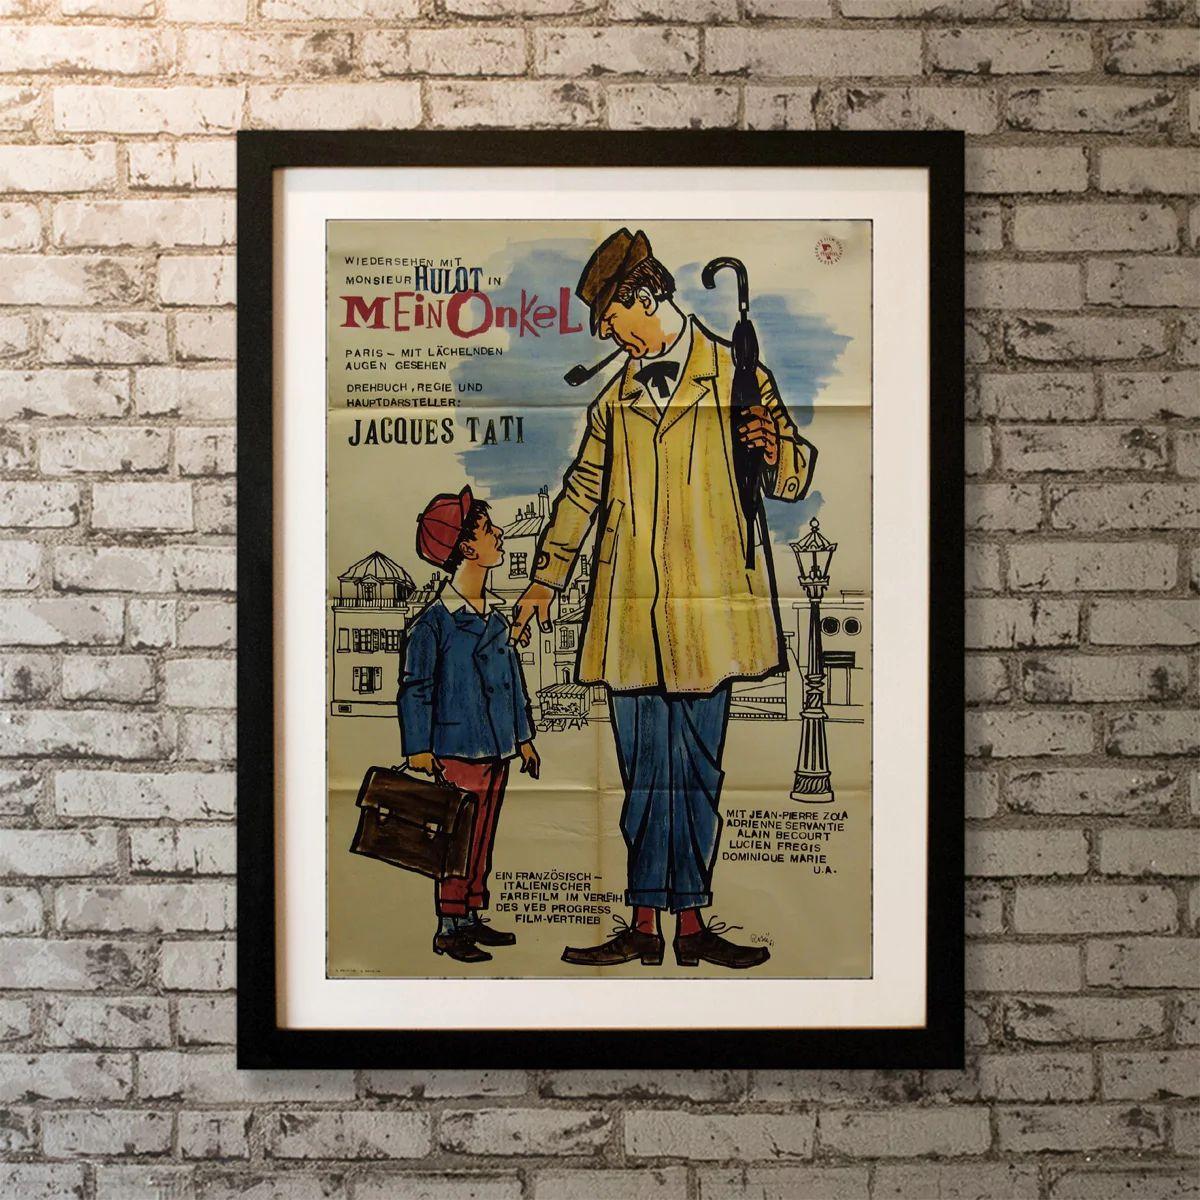 Mon Oncle, Unframed Poster, 1958

Original German Plakat (23 X 33 Inches). Monsieur Hulot visits the technology-driven world of his sister, brother-in-law, and nephew, but he can't quite fit into the surroundings.

Year: 1958
Nationality: